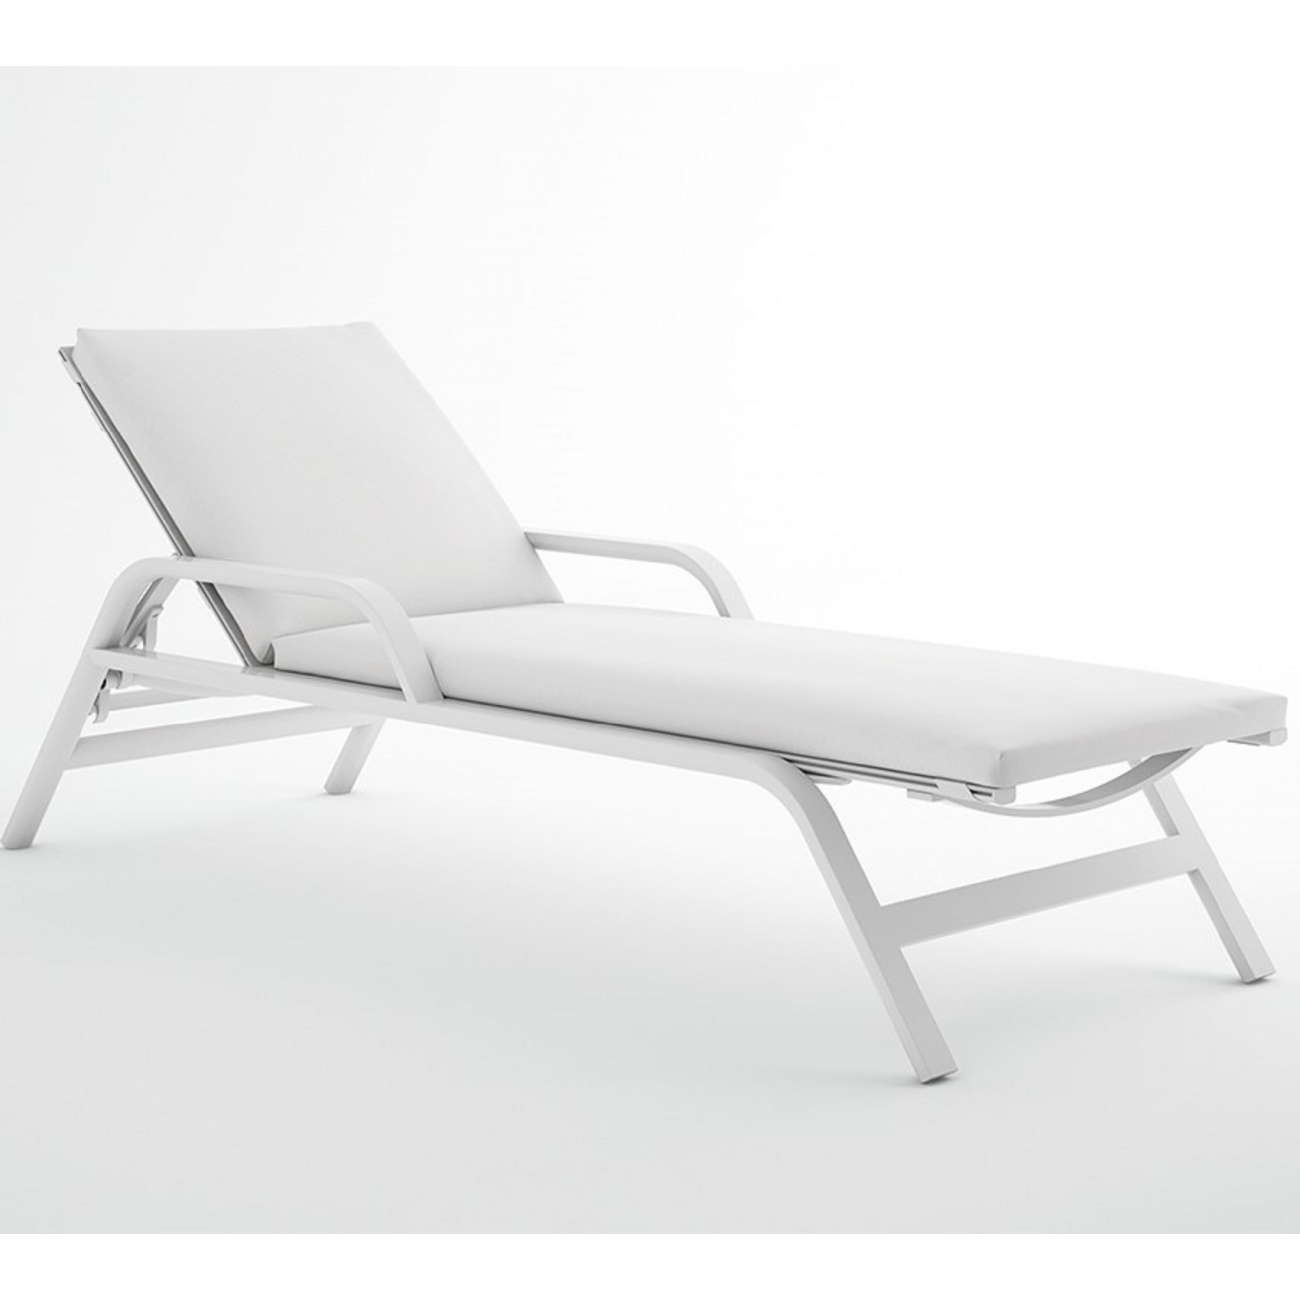 GANDIA BLASCO STACK CHAISELONGUE WITH ARMS